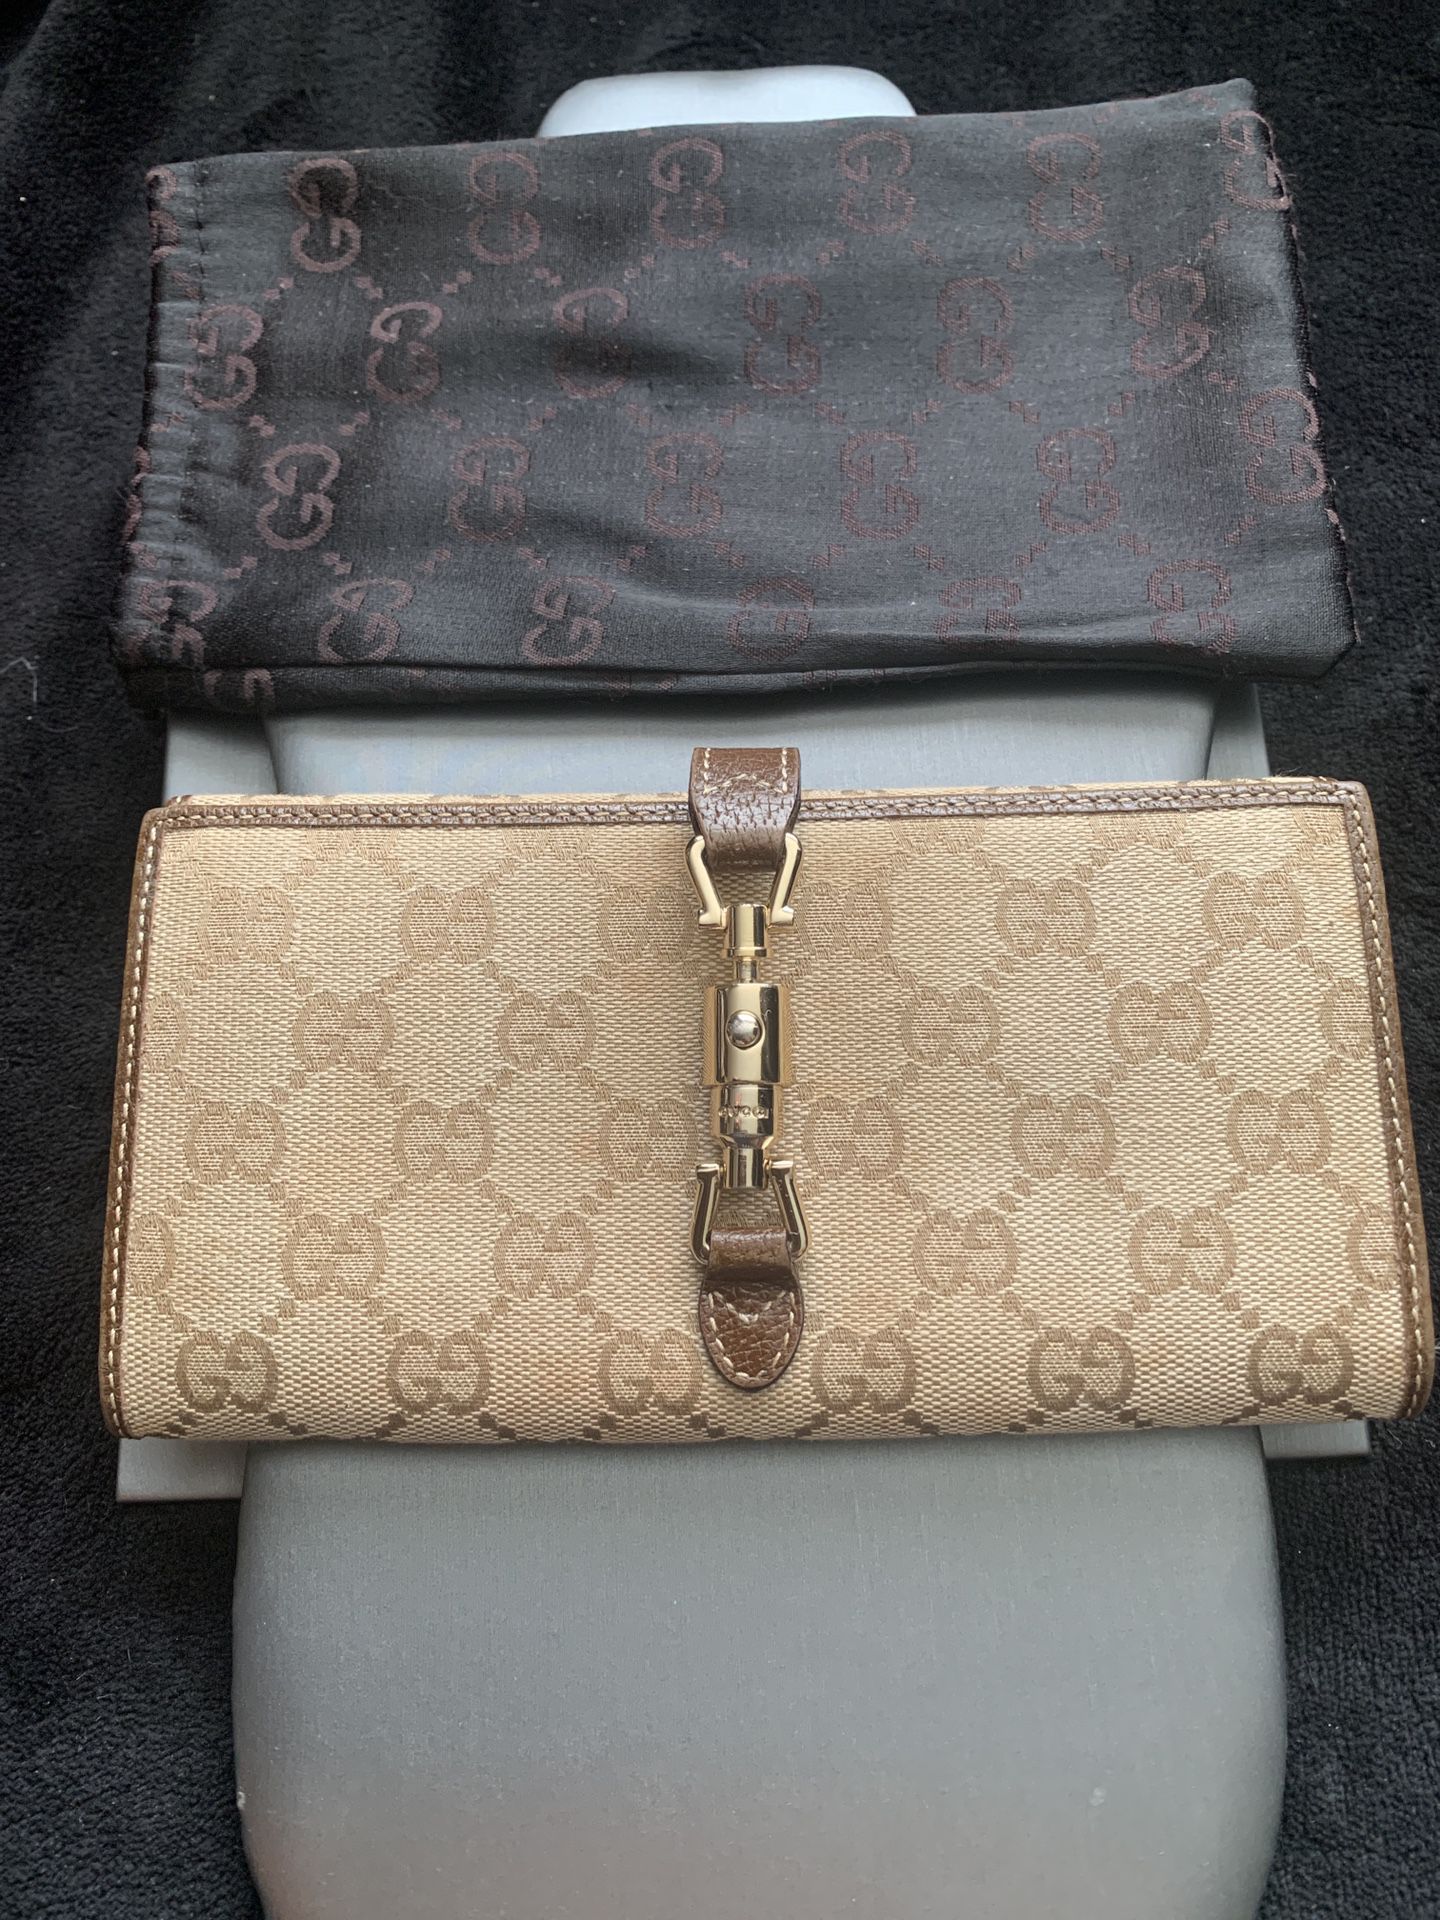 Authentic Gucci monogramed wallet with dust bag.